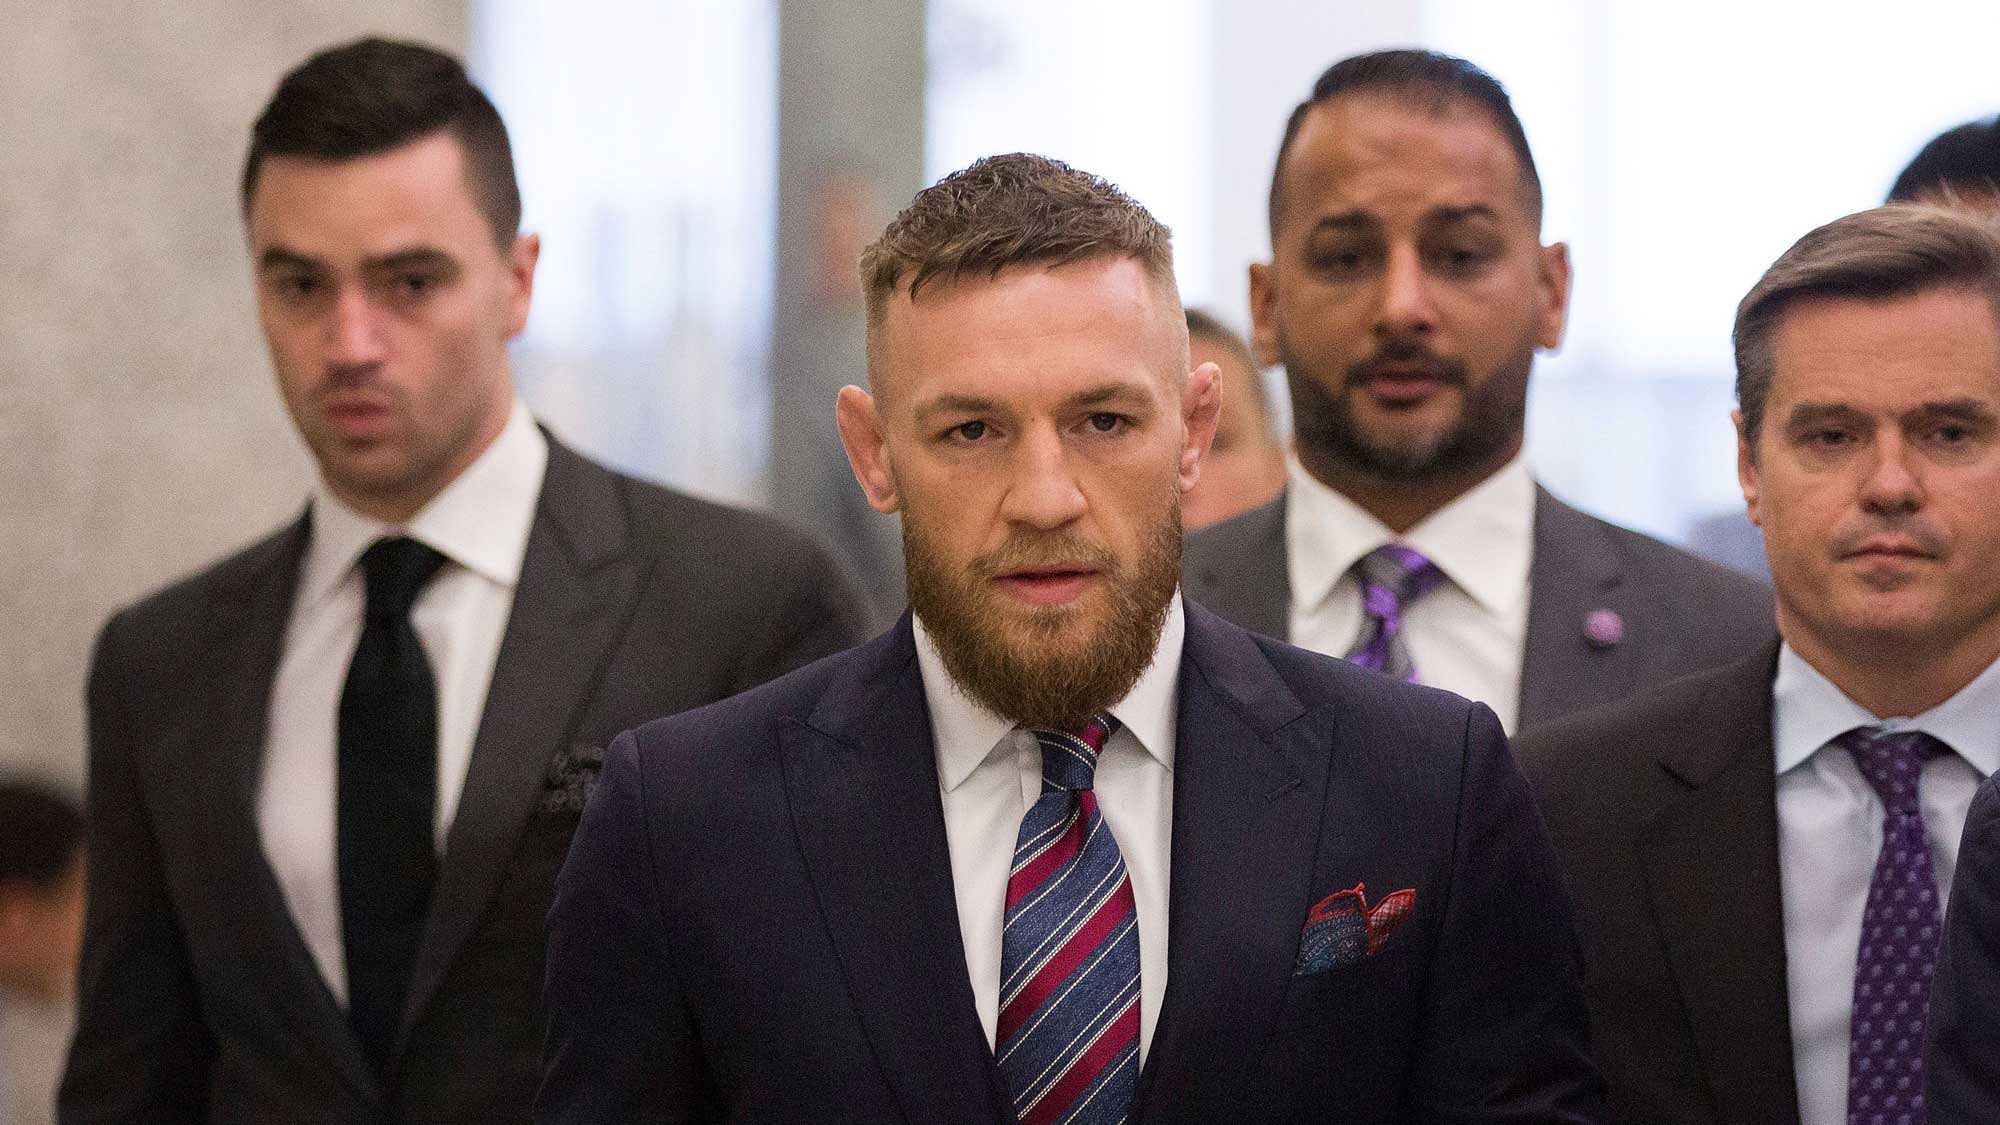 Conor McGregor will return to mixed martial arts on Oct. 6 in Las Vegas.